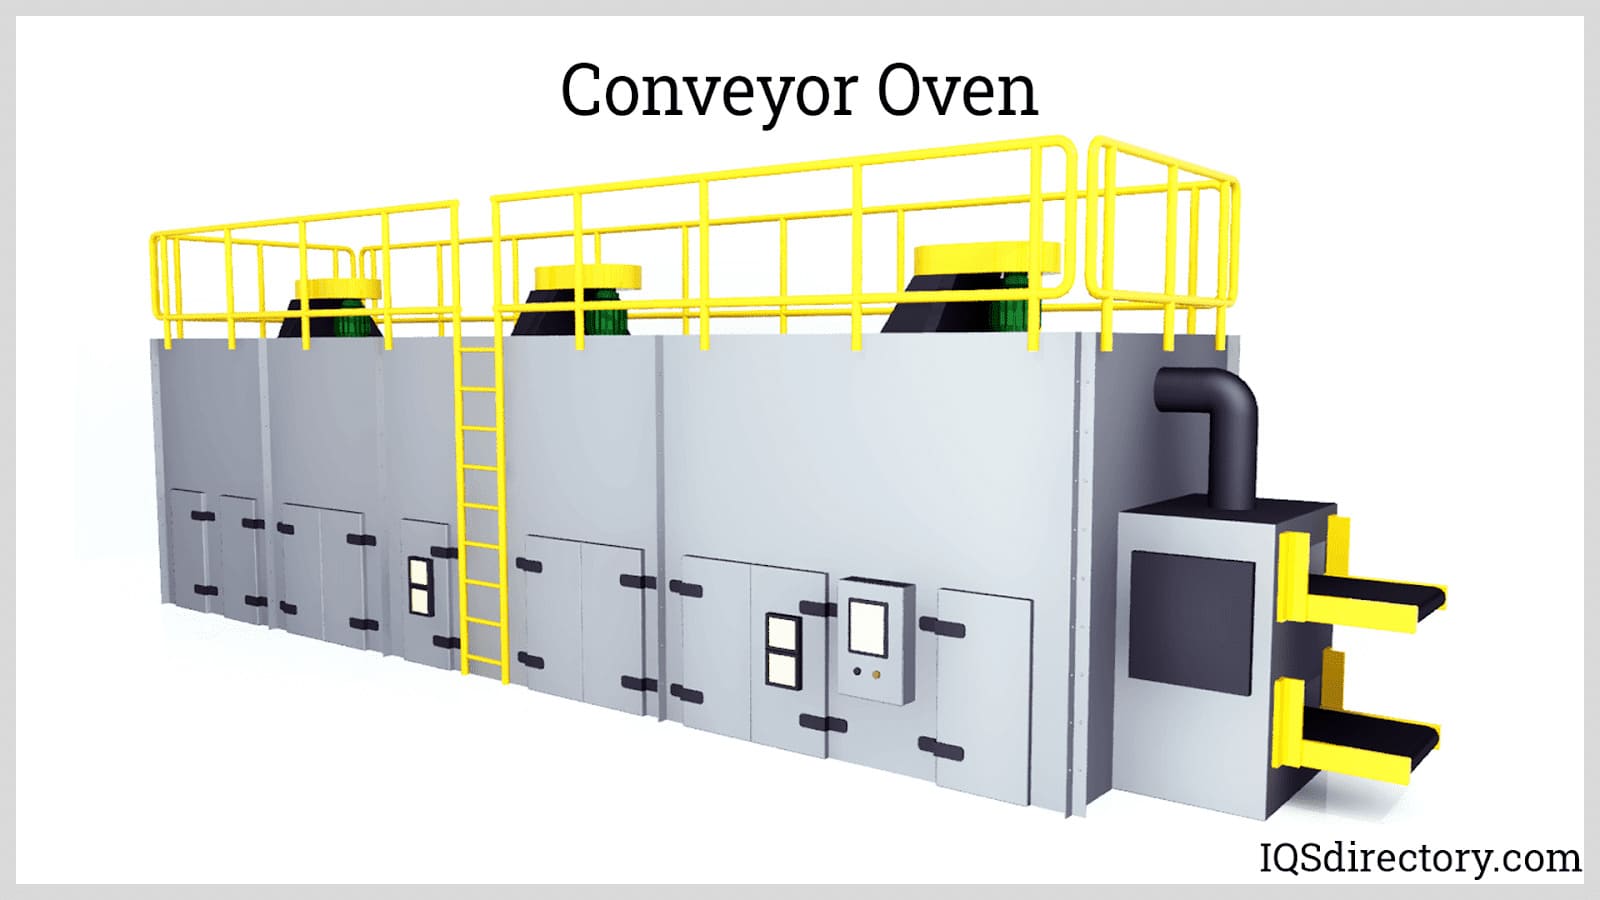 Industrial Oven: What is it? Uses, Types & Use, How It Works